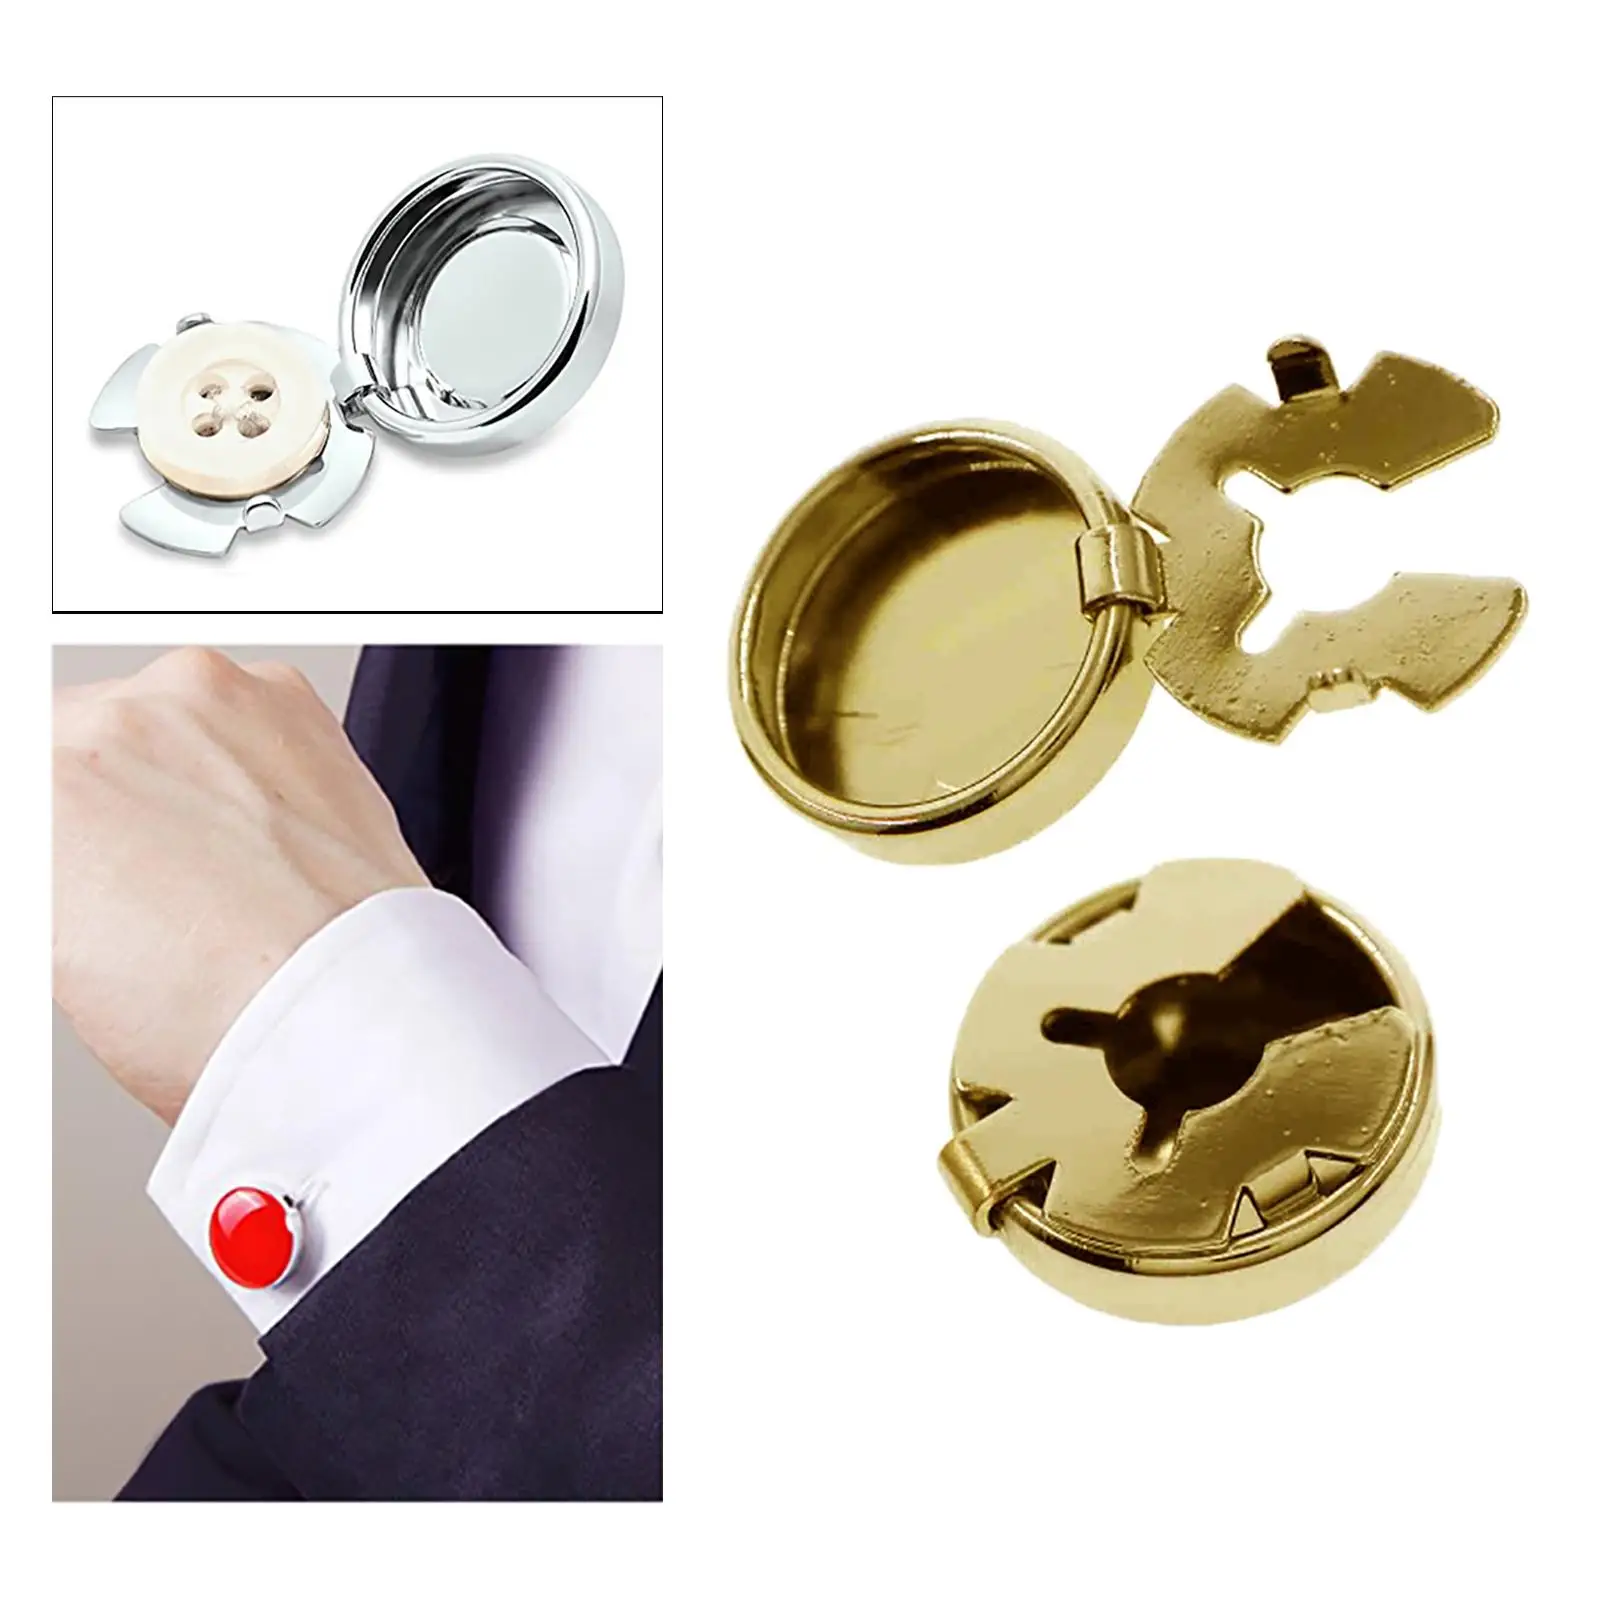 2 Pieces Fashion Suit Shirt Buttons Cufflink, Circular Formal, Button Covers  for